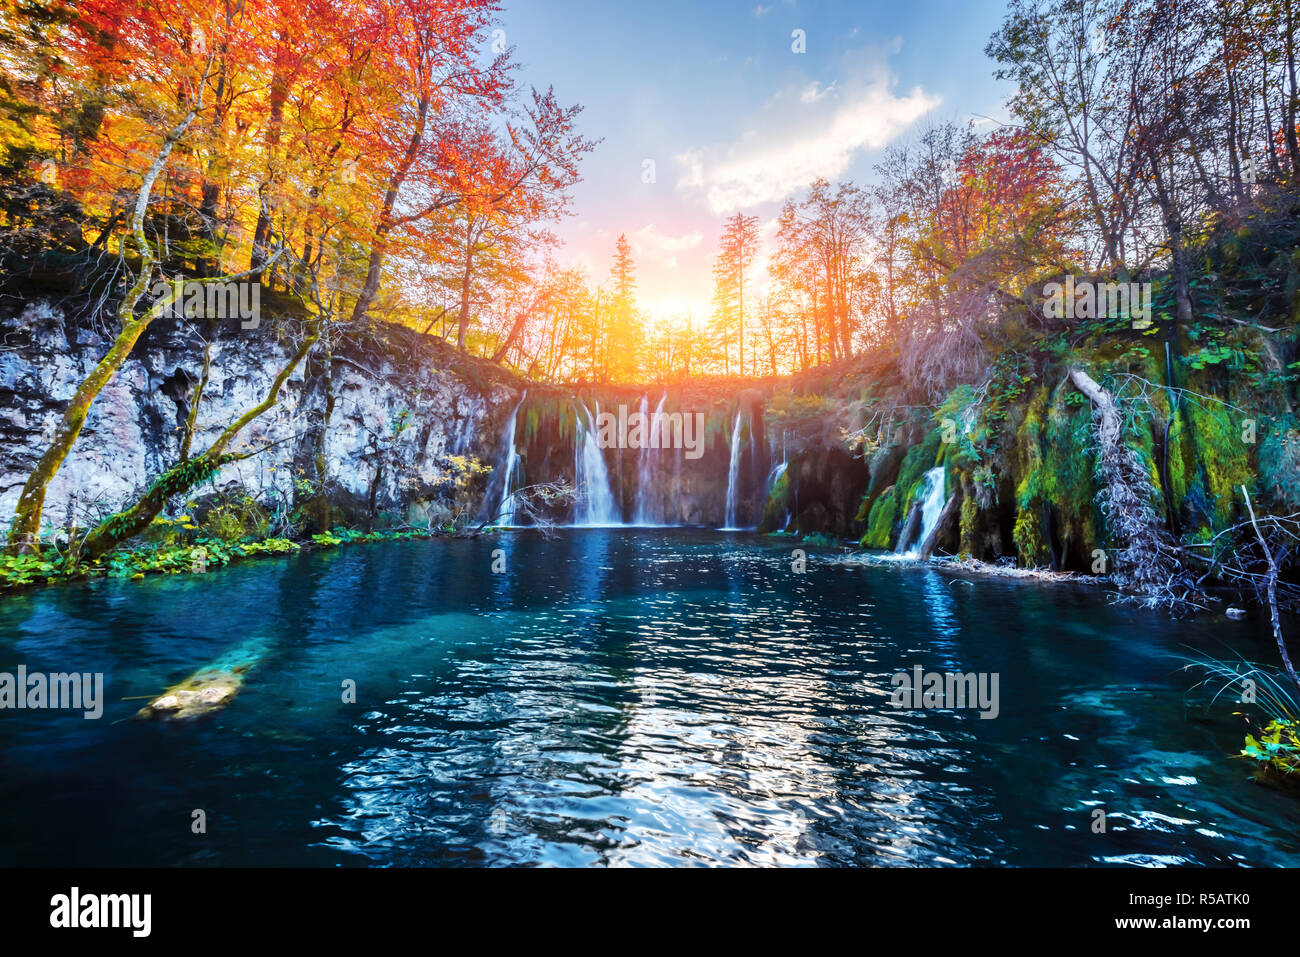 Amazing waterfall with pure blue water in Plitvice lakes. Orange autumn forest on background. Plitvice National Park, Croatia. Landscape photography Stock Photo